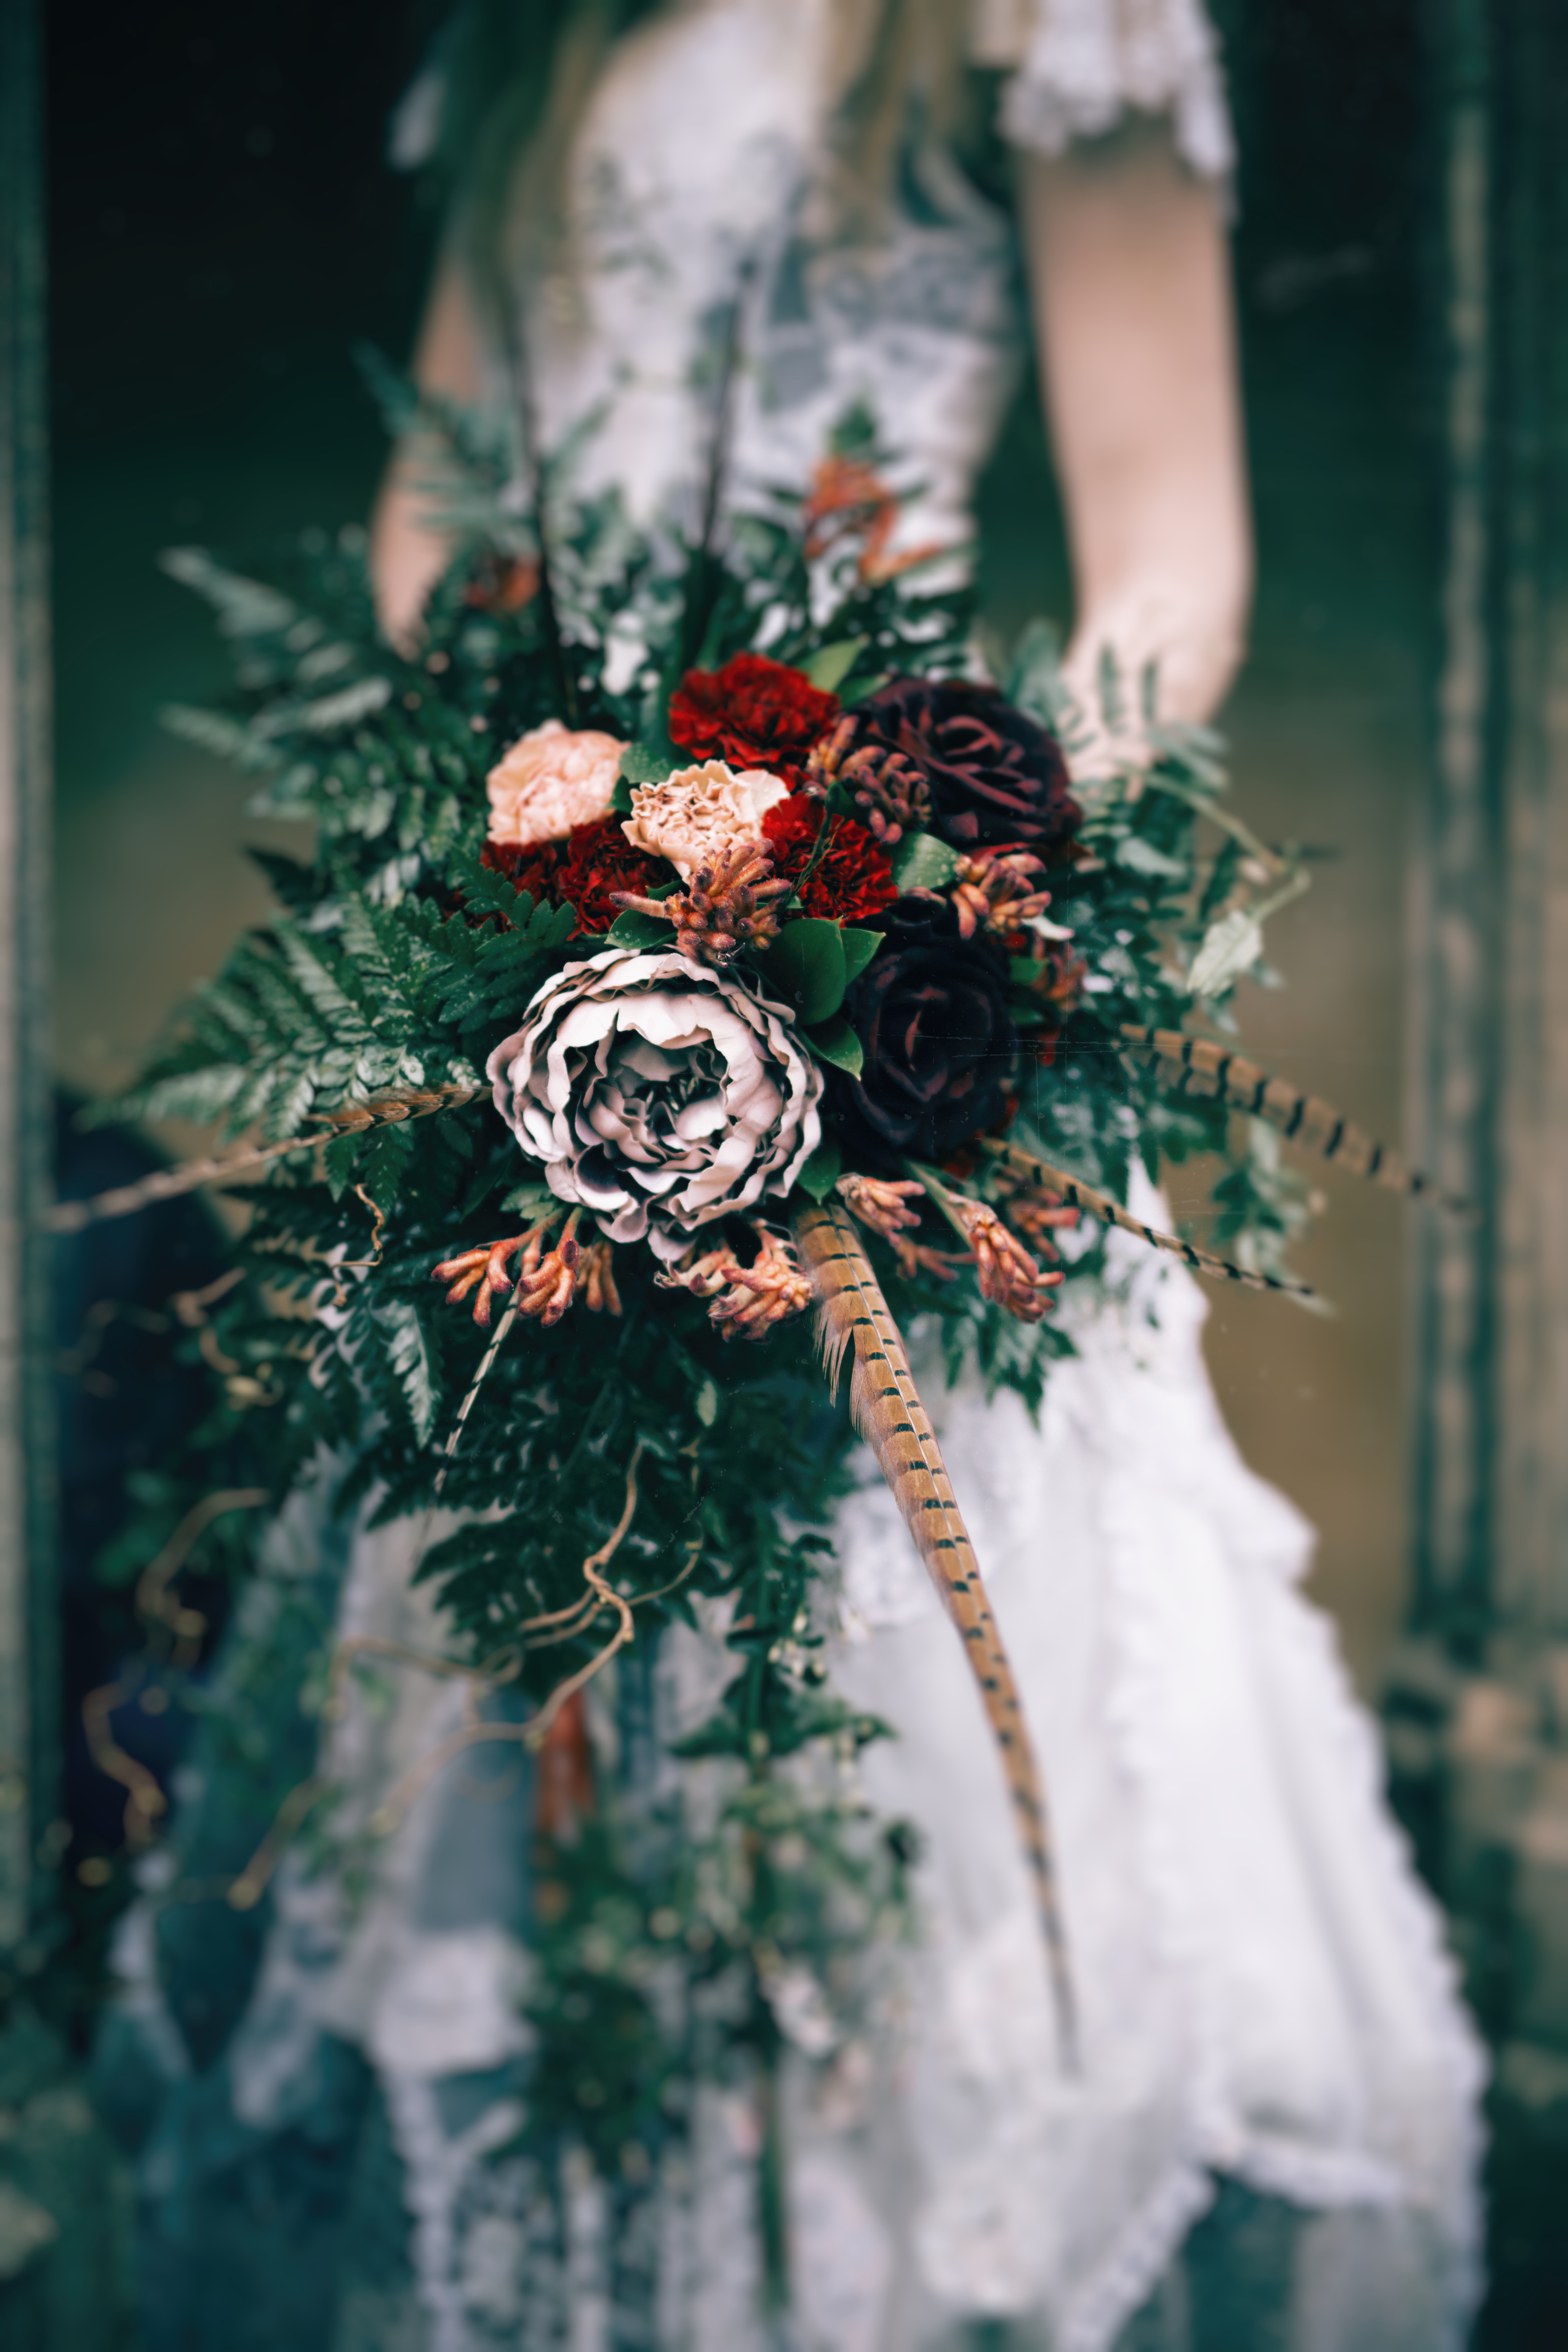 Gothic Style Wedding Inspiration- The Nightmare Bride and Alternative Bridal Trends